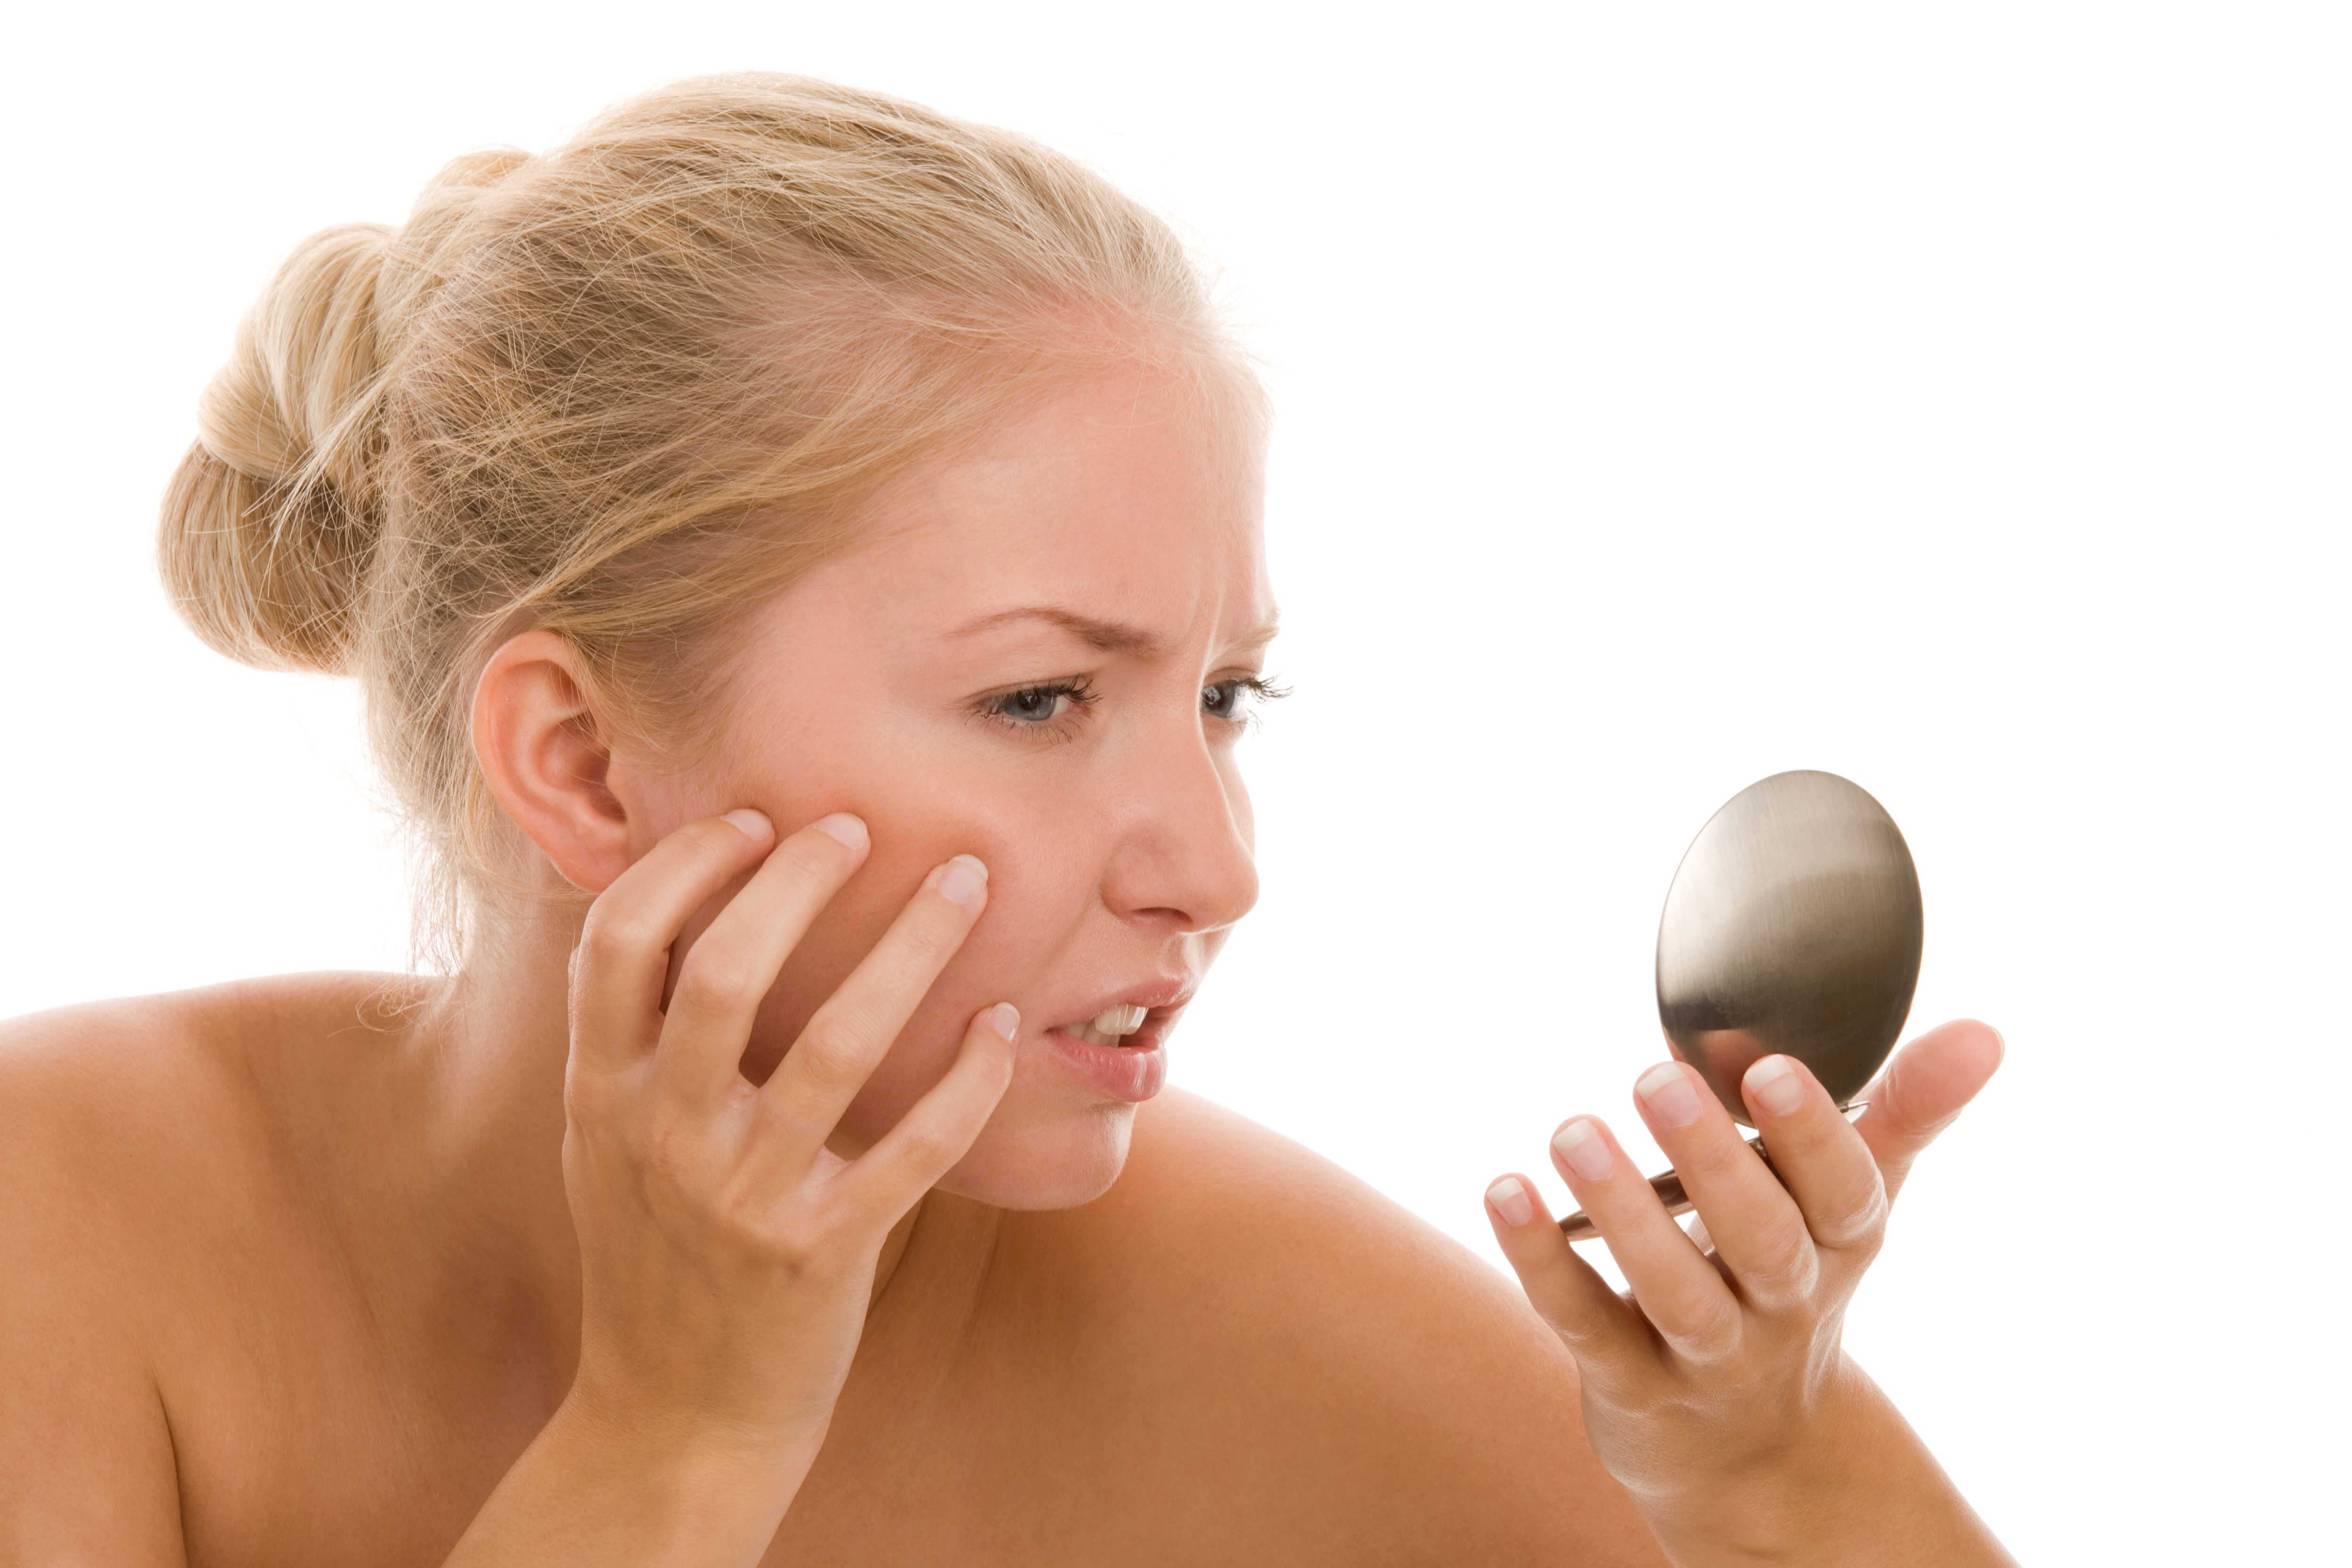 Why You Should Be Wise About Choosing Skin Cream?